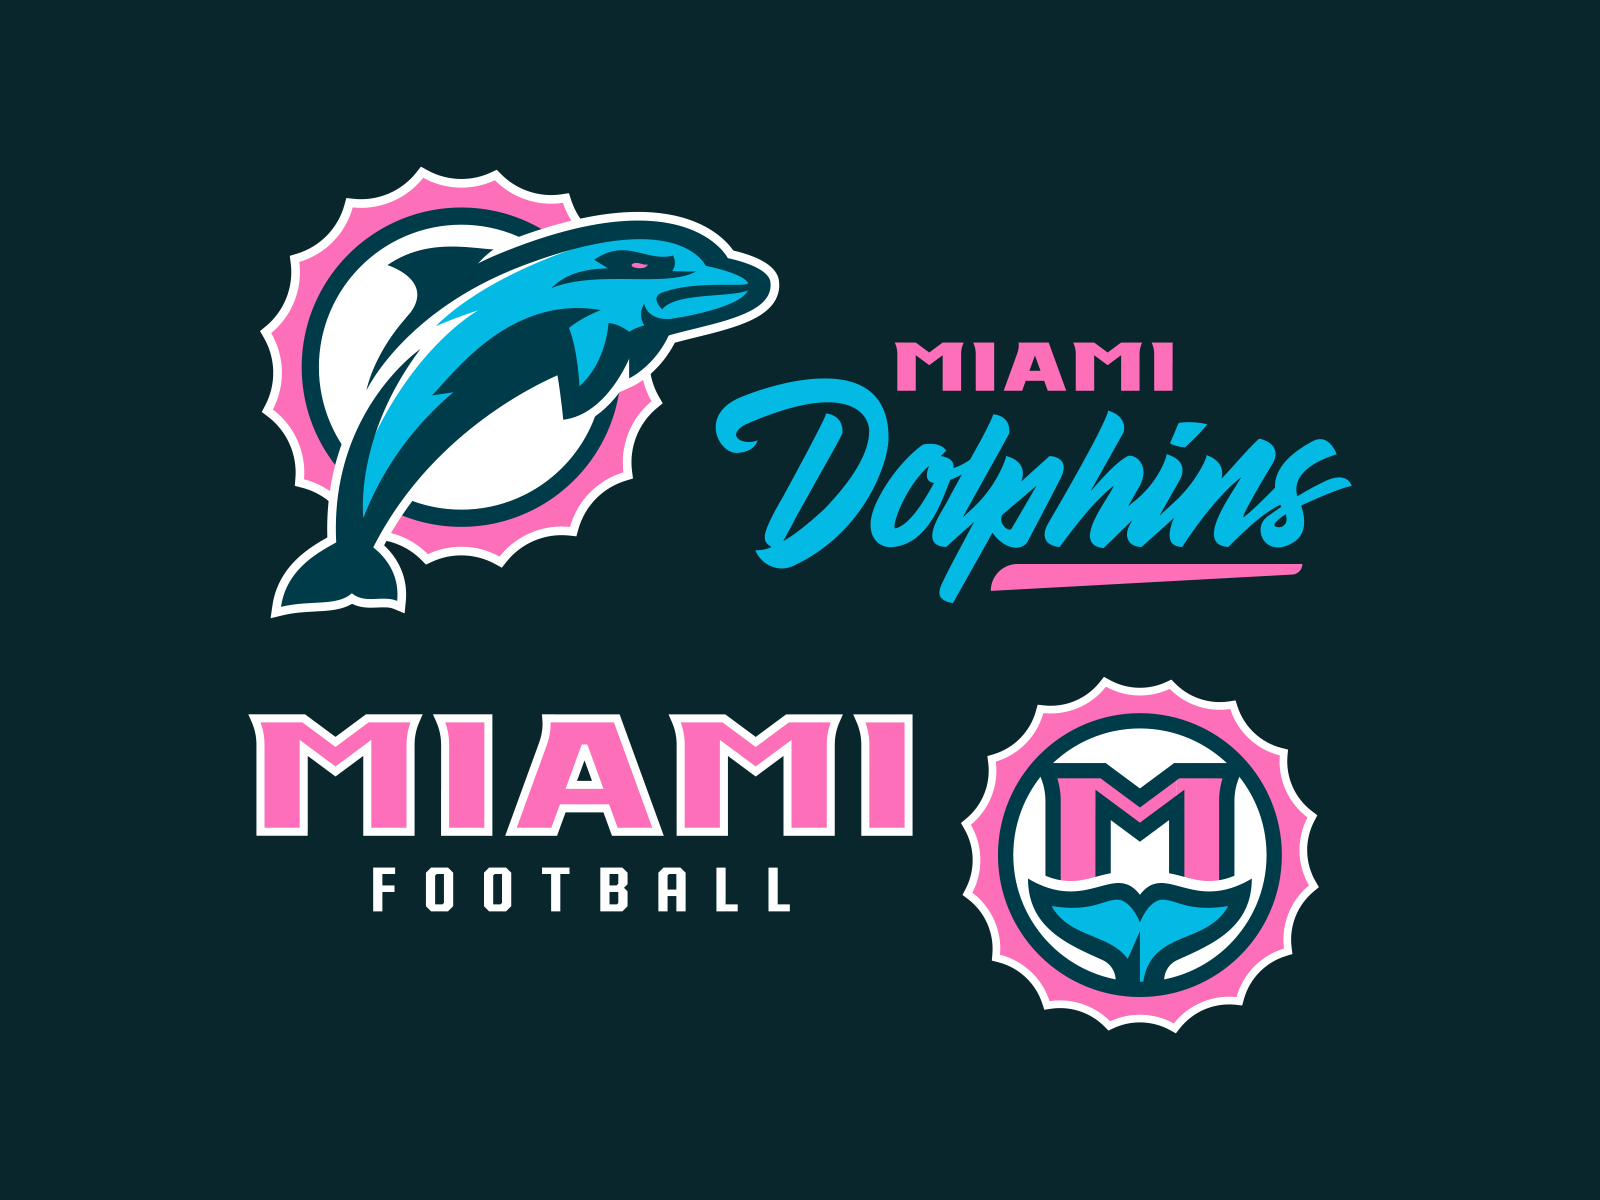 Miami Dolphins "Miami Vice" Concept by Dan Blessing on Dribbble